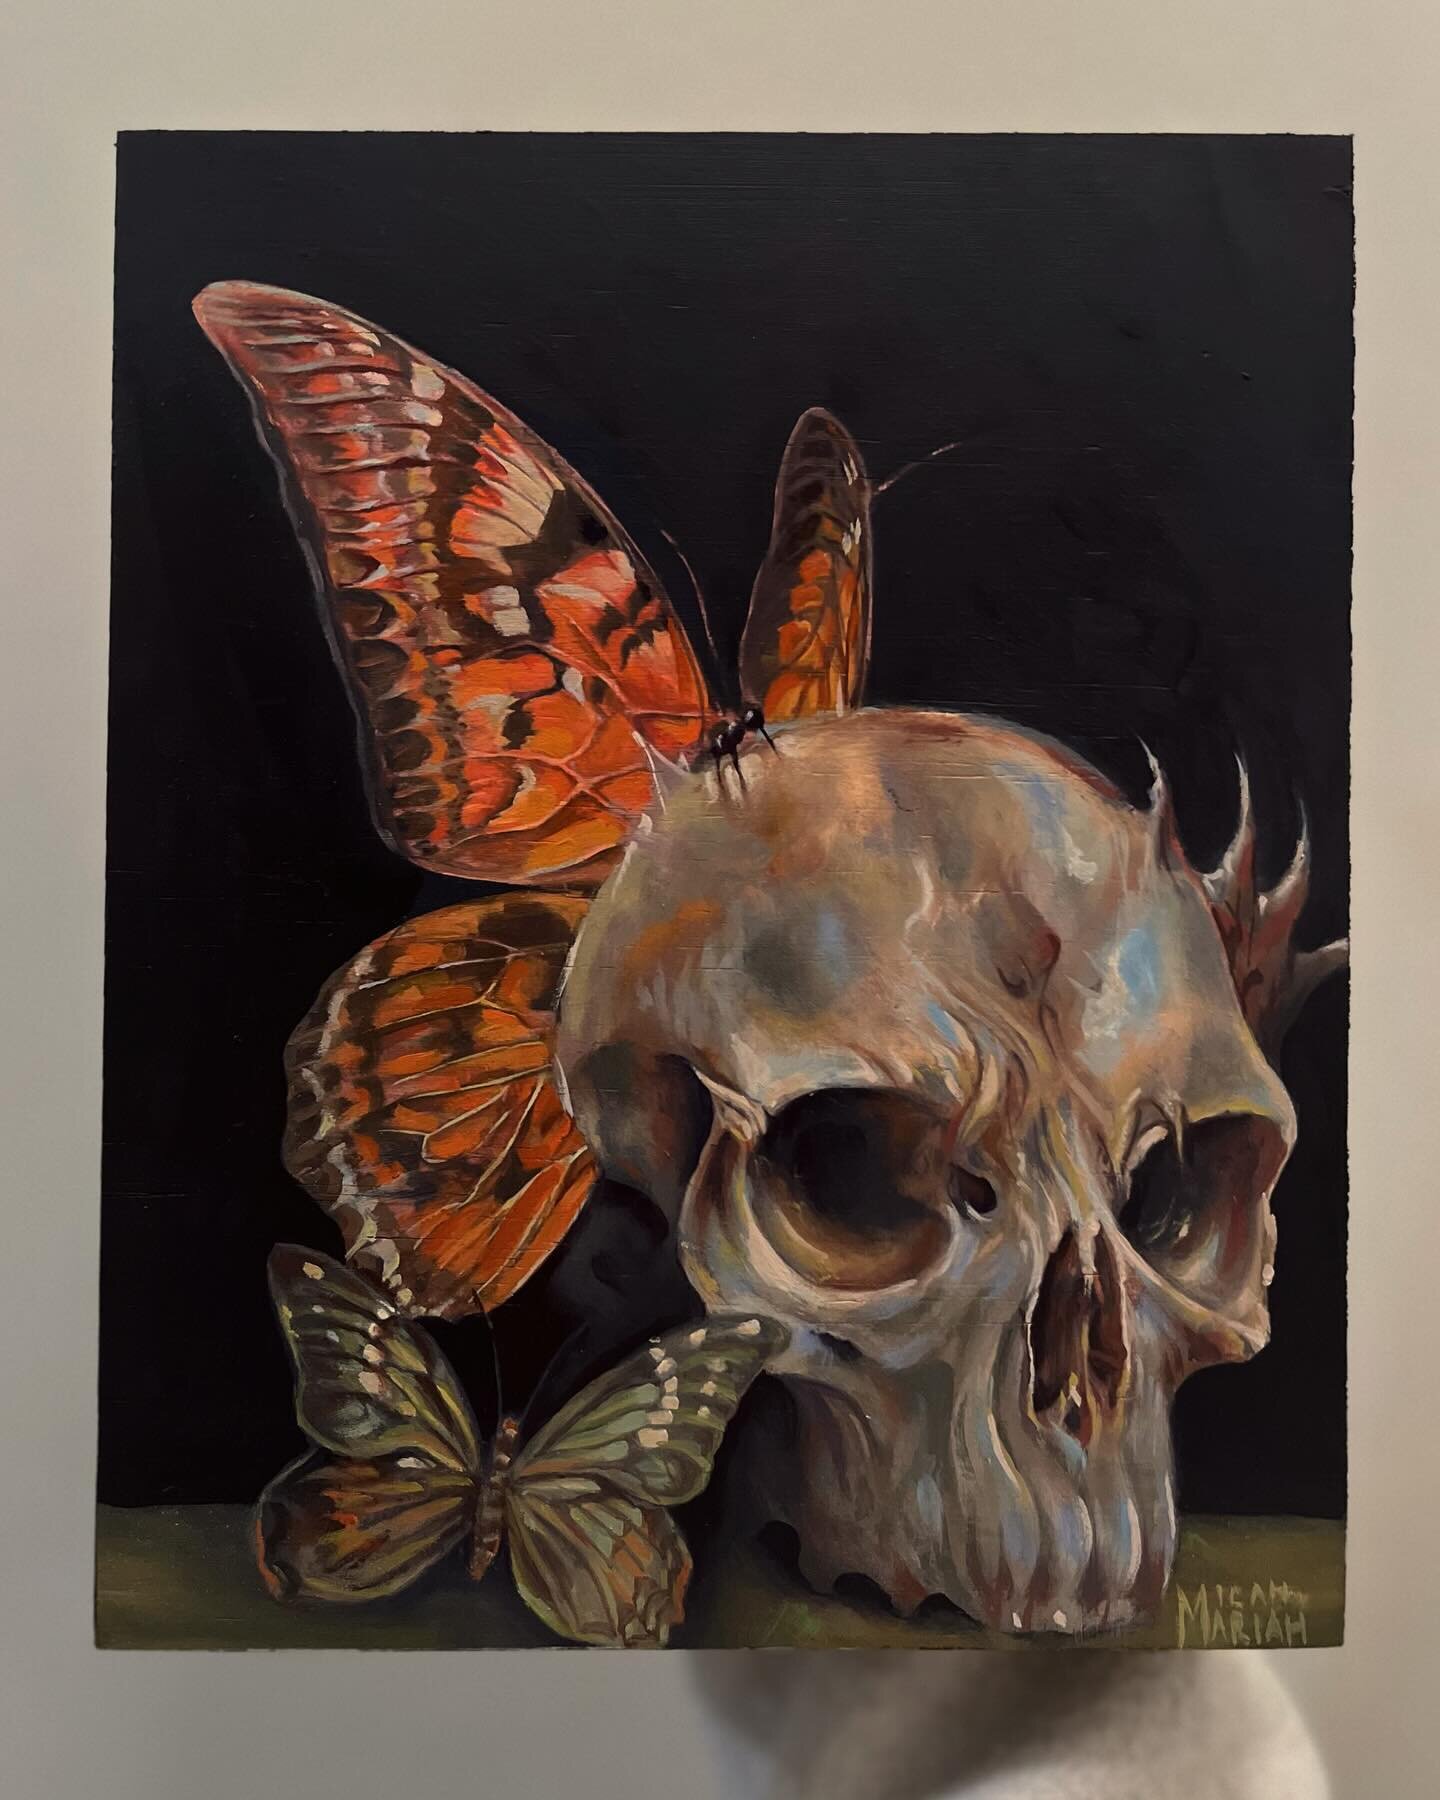 Lovely bones. Oil on panel. Available for purchase through @thumbprintartgallery 
.
.
.
.
.
#art #arte #tattooing #visual #paintinf #artgallery #tattoo #inked #ink #oils